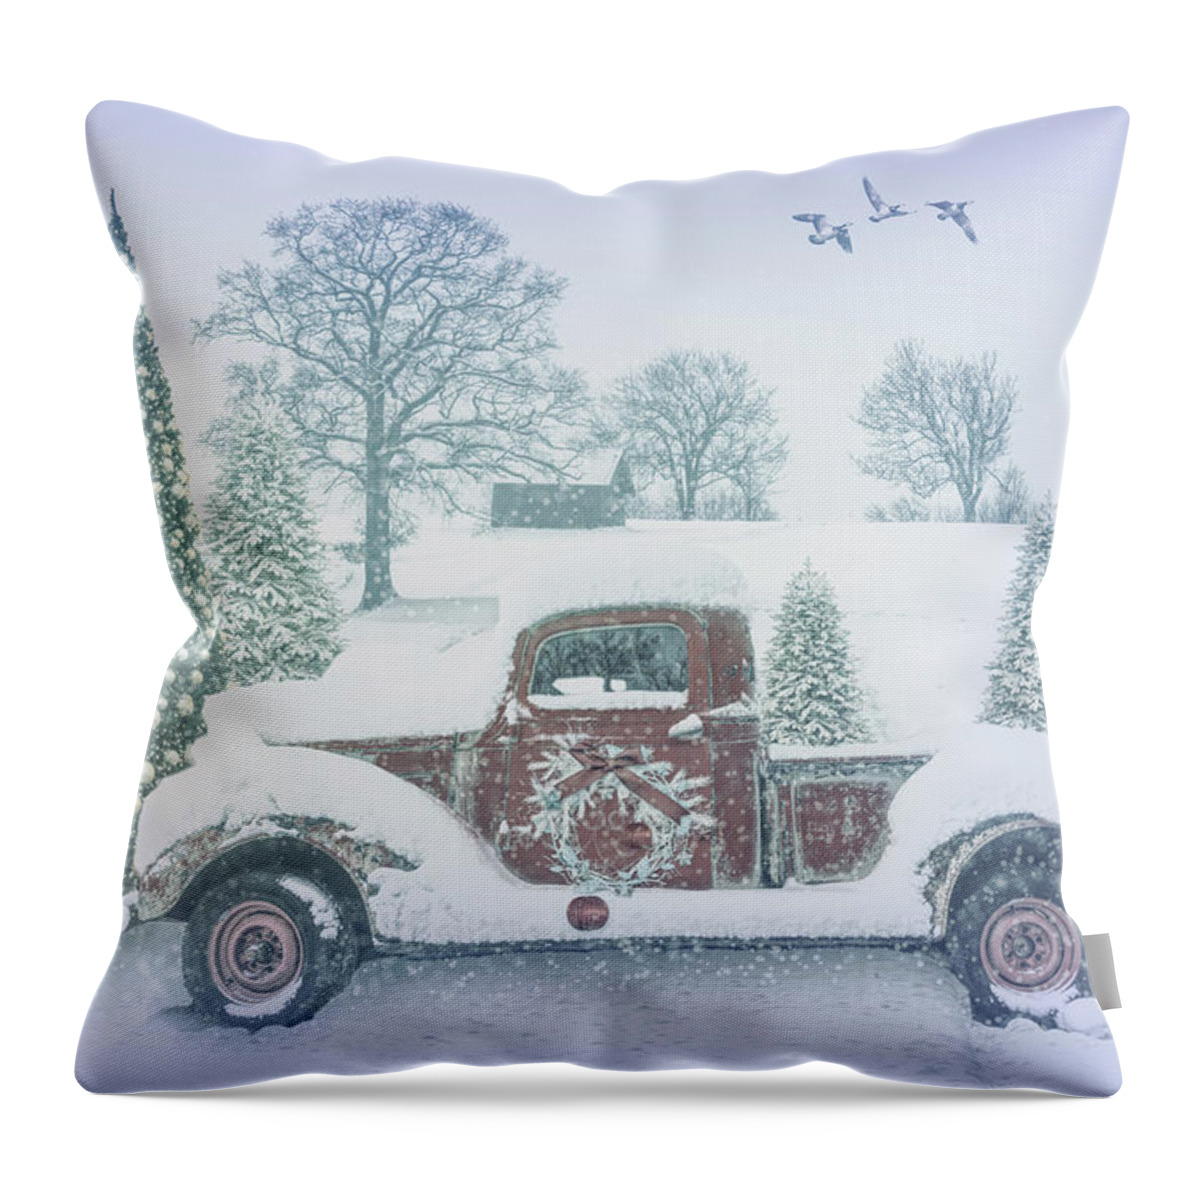 Christmas Throw Pillow featuring the photograph Snowy Pale Red Truck by Debra and Dave Vanderlaan